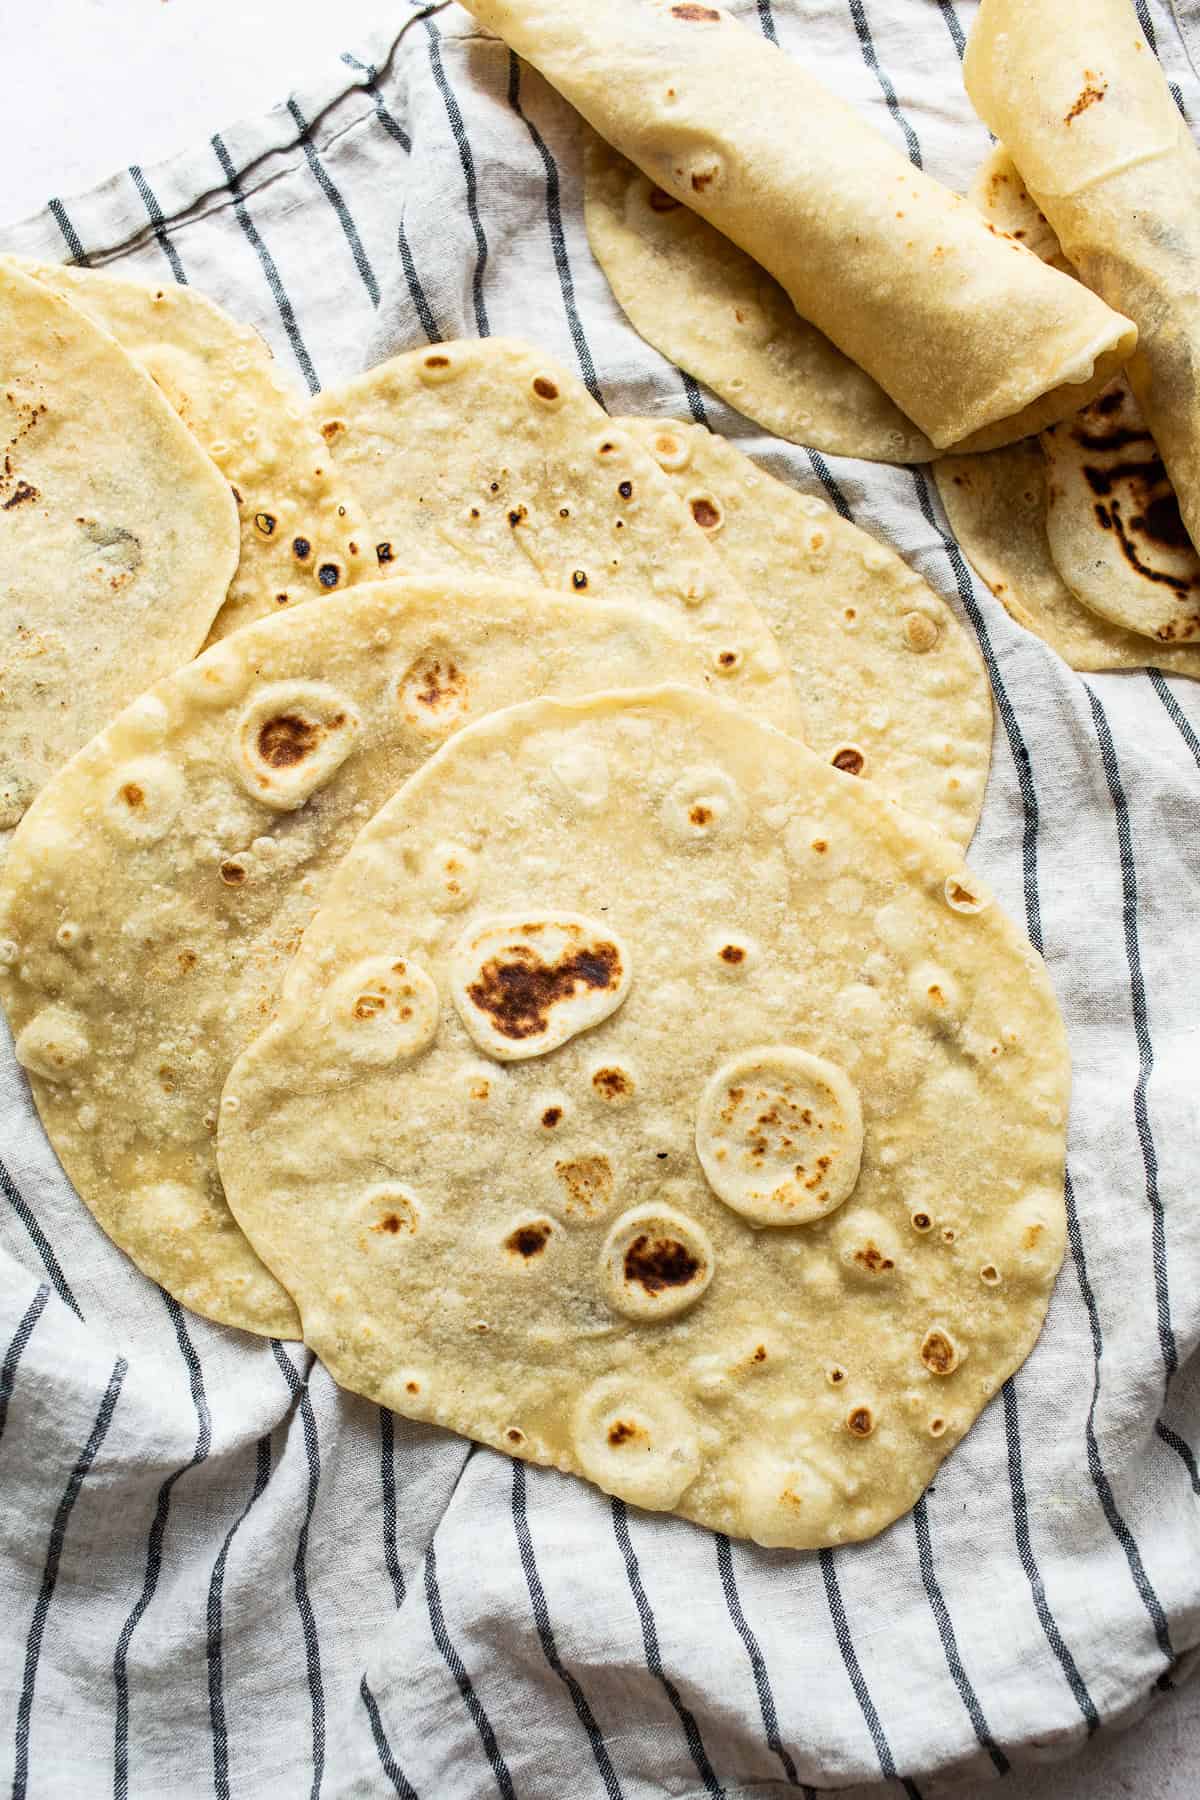 Flour tortillas cooked and ready to eat